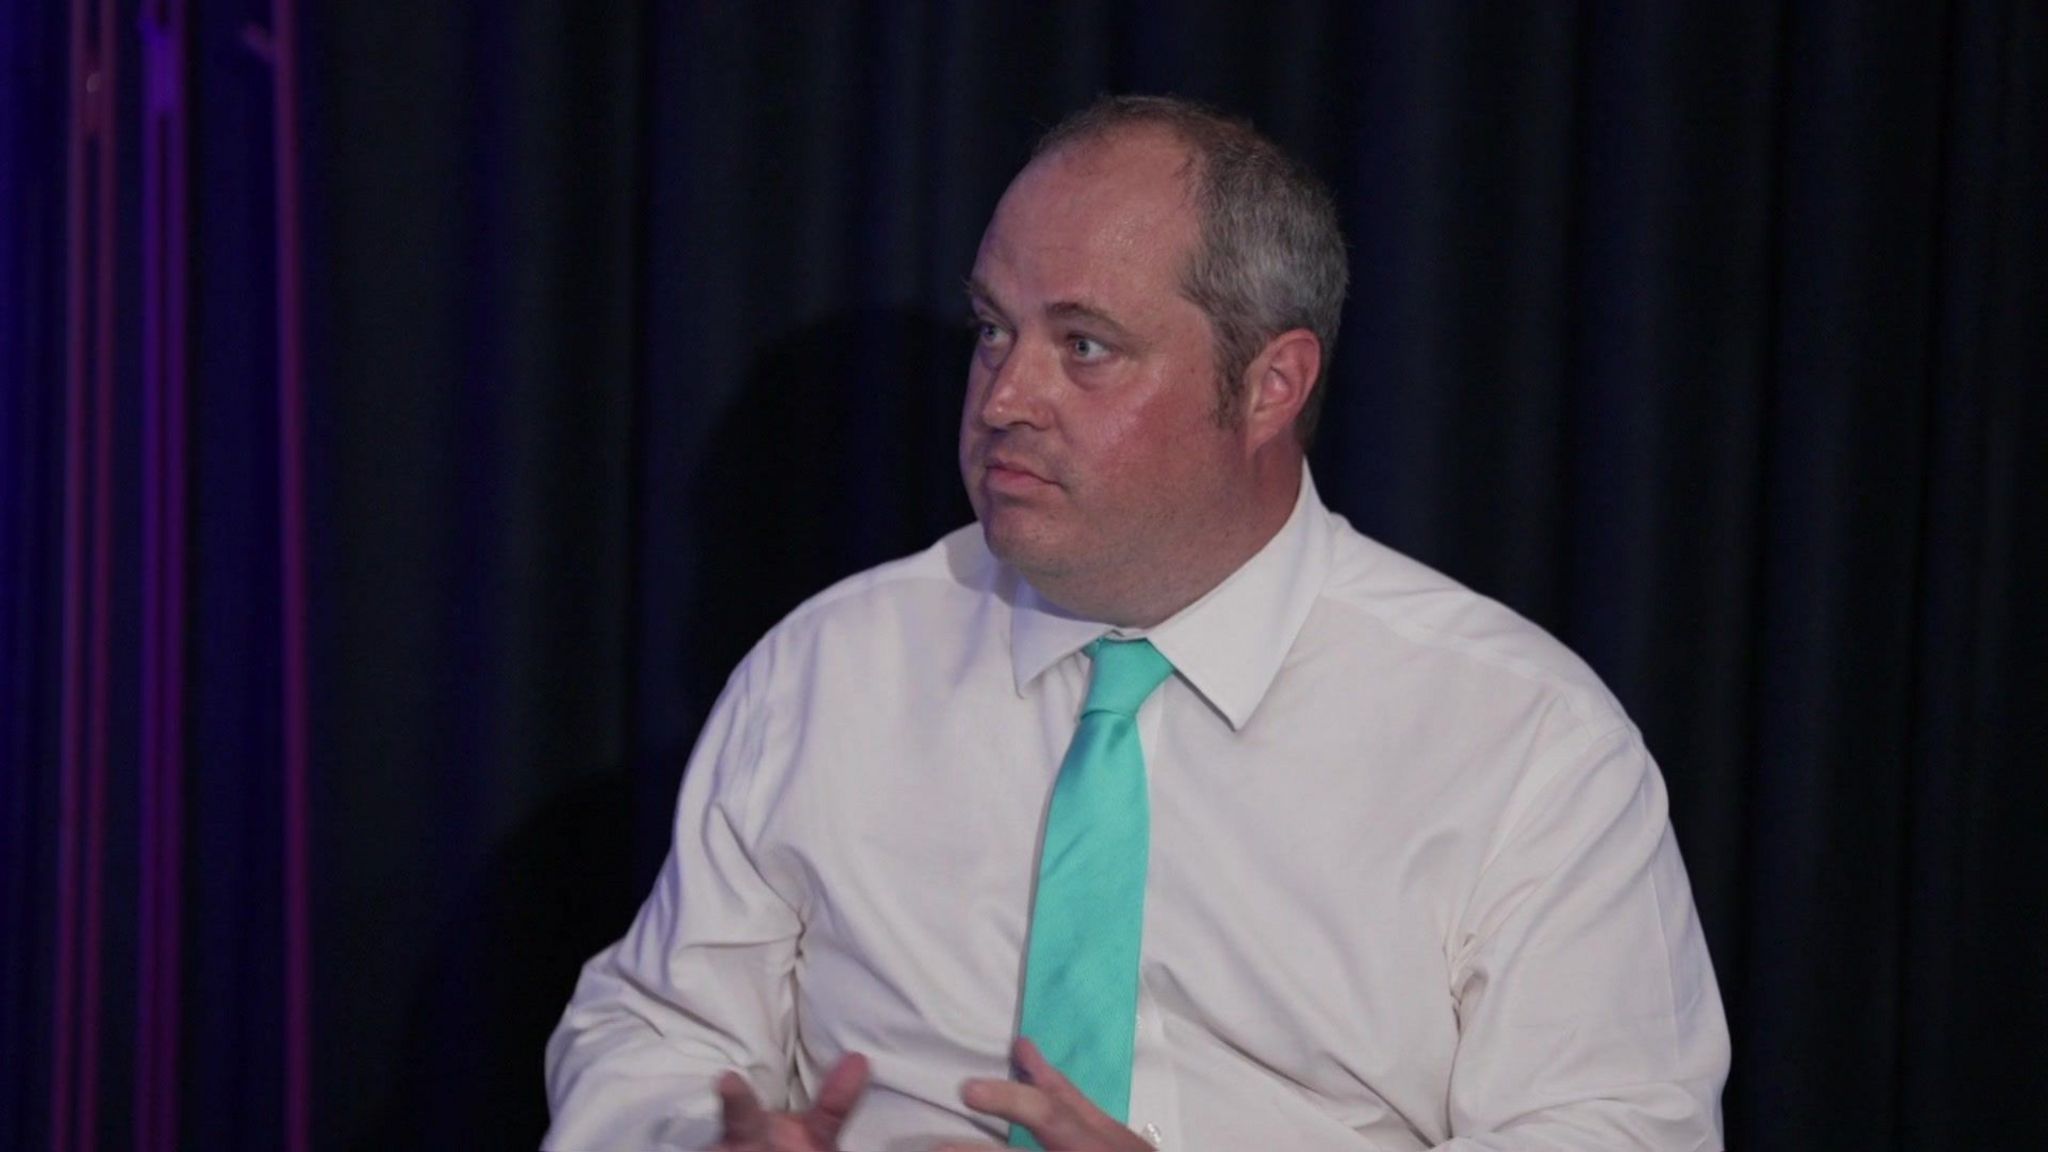 Reform UK party member Alex Wilson, wearing a white shirt and green tie